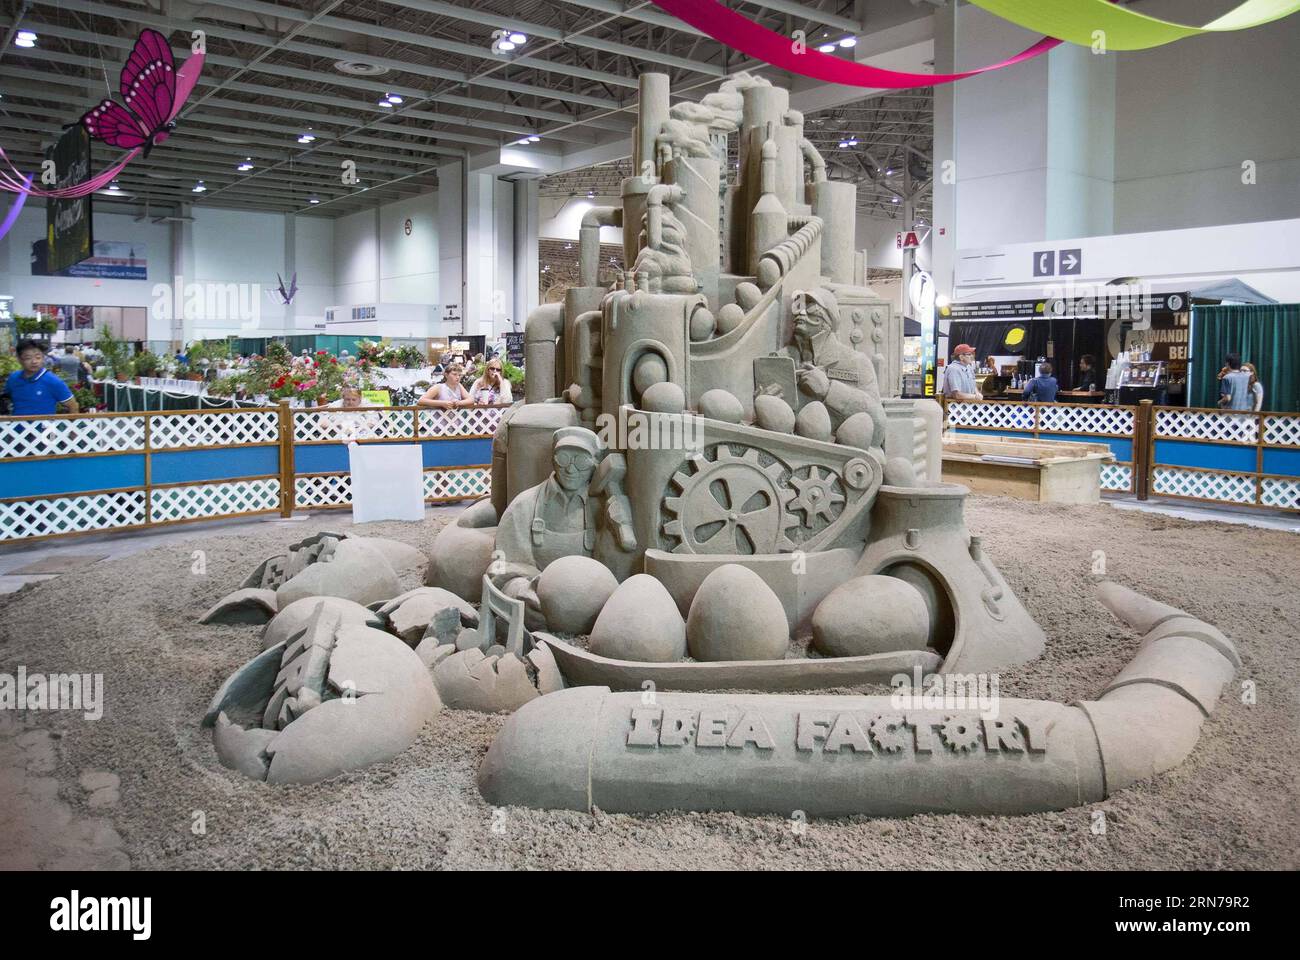 KULTUR Sandskulpturen Wettbewerb in Toronto (150829) -- TORONTO, Aug. 28, 2015 -- A sand sculpture is displayed during the 2015 International Sand Sculpting Pairs Competition at the 137th Canadian National Exhibition in Toronto, Canada, Aug. 28, 2015. ) CANADA-TORONTO-CANADIAN NATIONAL EXHIBITION-SAND SCULPTING PAIRS COMPETITION ZouxZheng PUBLICATIONxNOTxINxCHN   Culture Sand sculptures Competition in Toronto  Toronto Aug 28 2015 a Sand Sculpture IS displayed during The 2015 International Sand sculpting pairs Competition AT The 137th Canadian National Exhibition in Toronto Canada Aug 28 2015 C Stock Photo